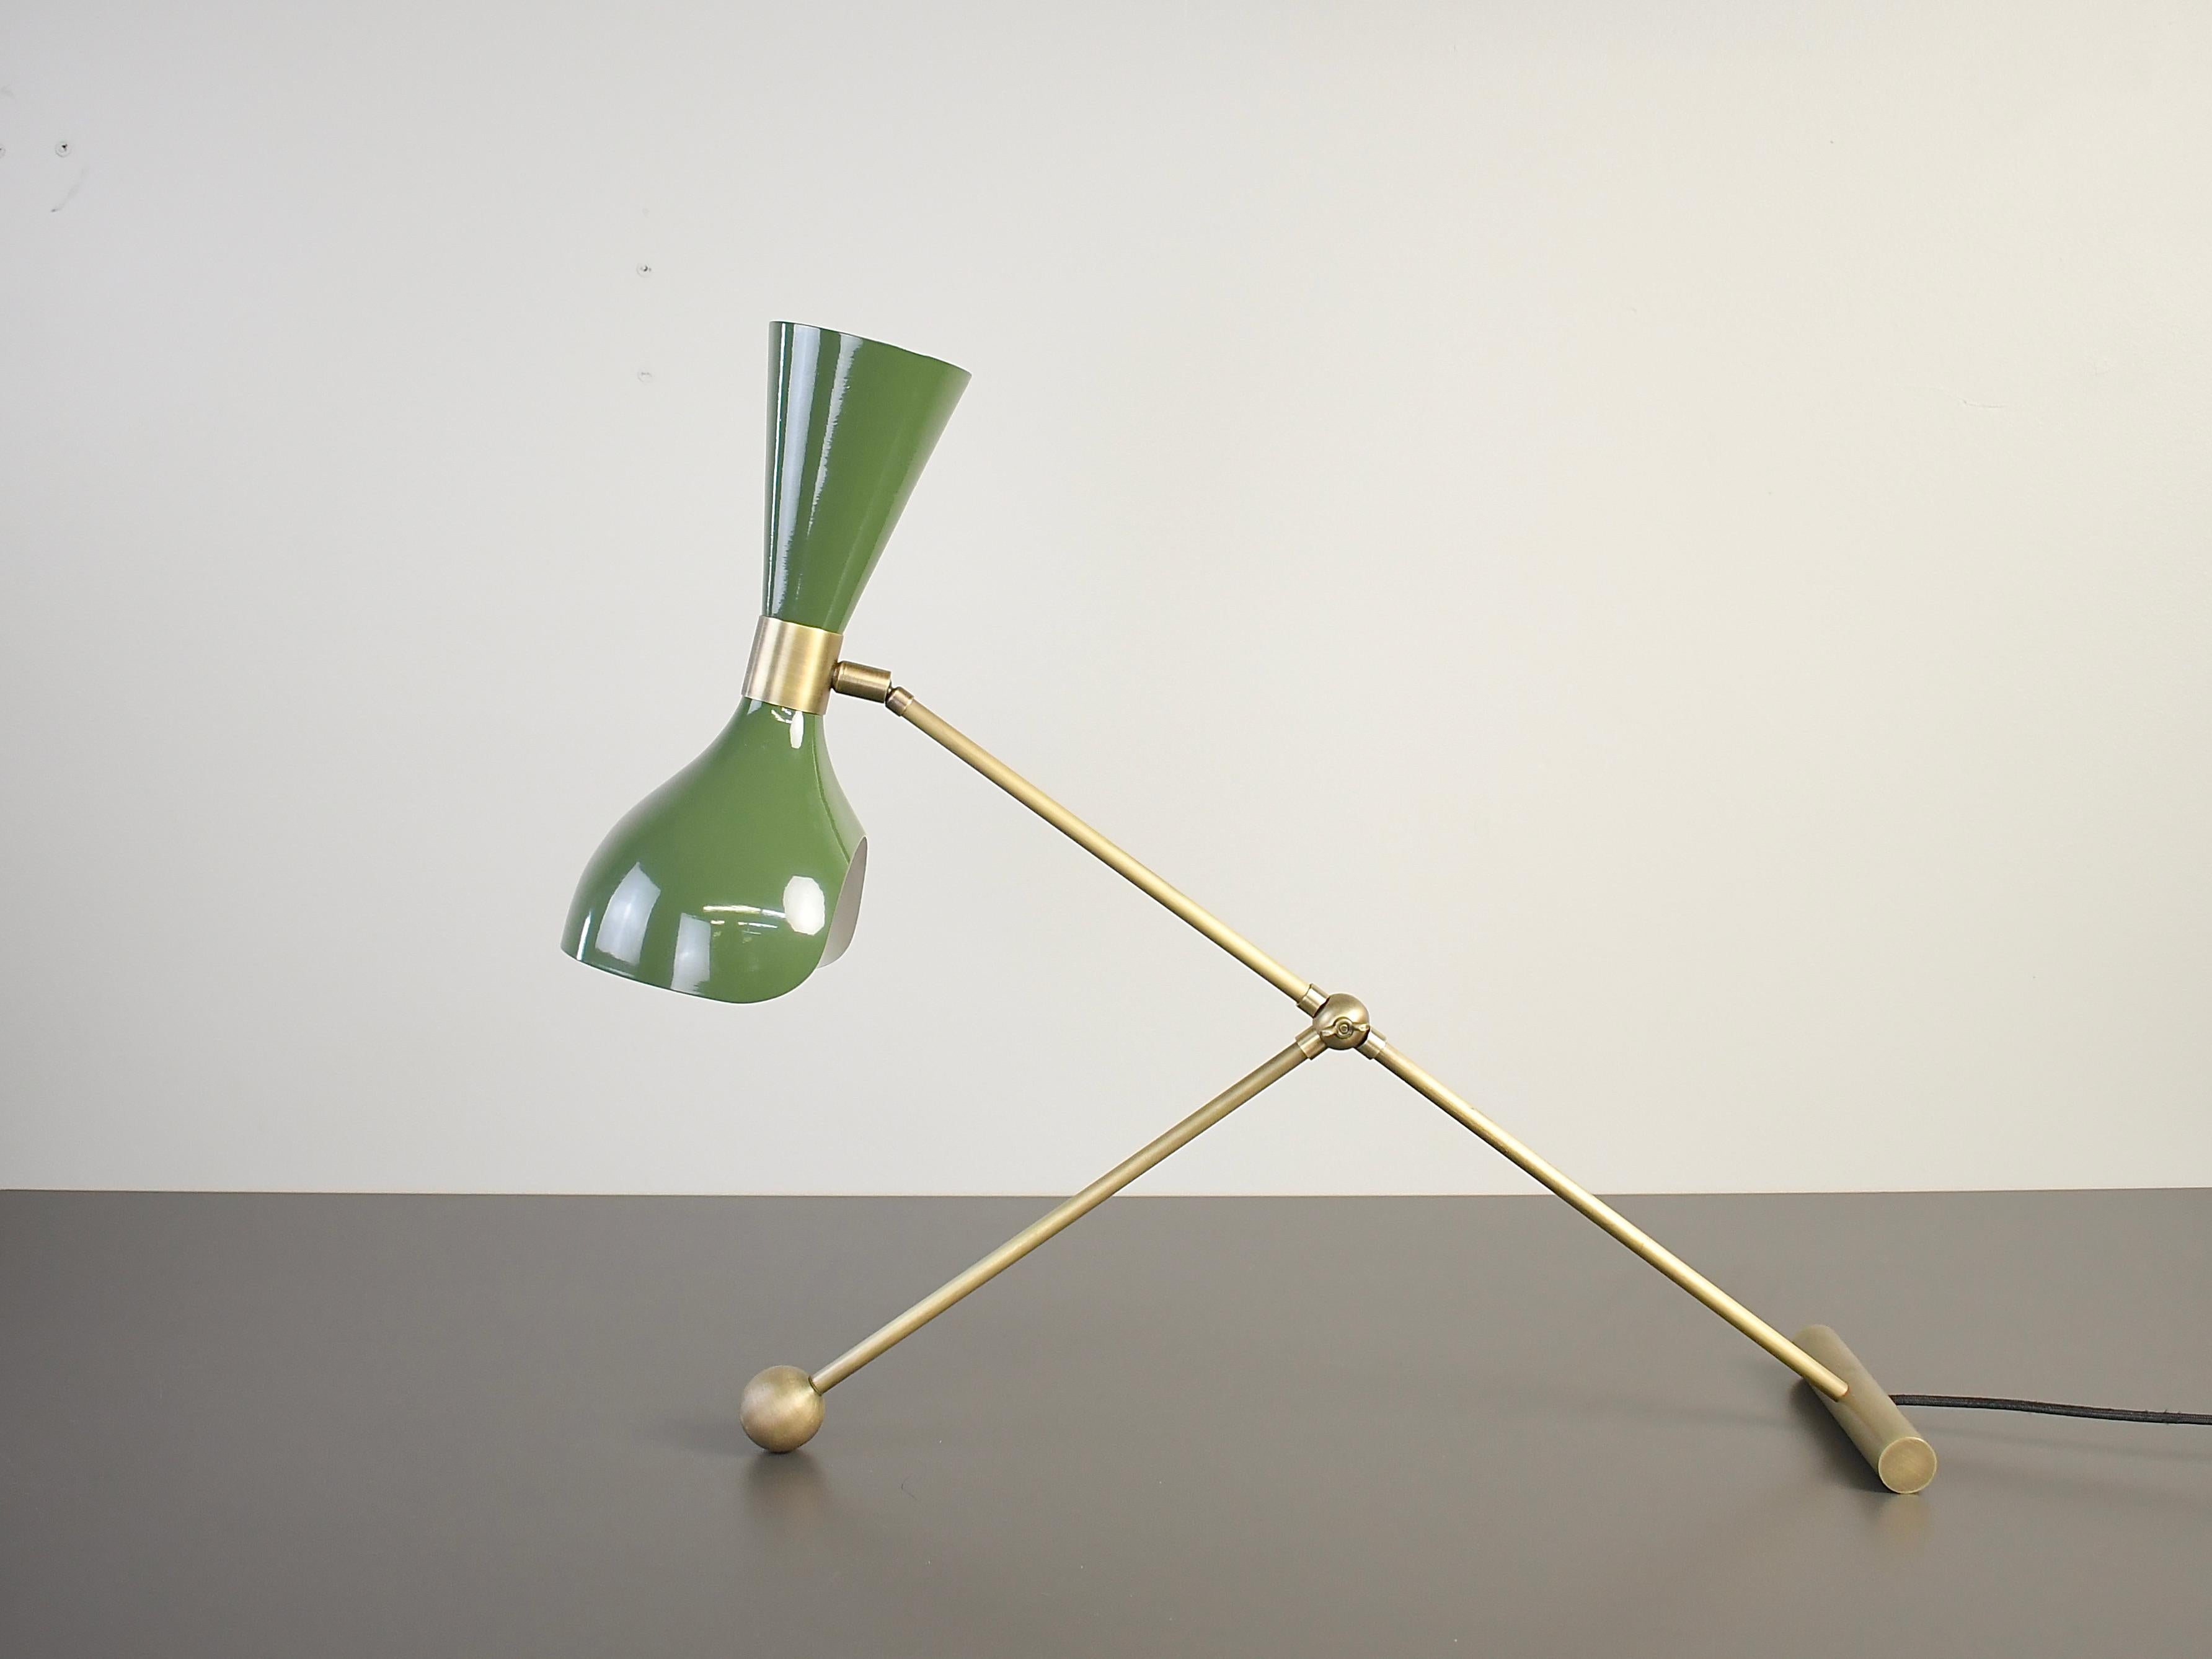 Contemporary Torno Desk Lamp or Table Lamp in Olivine Enamel & Brass by Blueprint Lighting